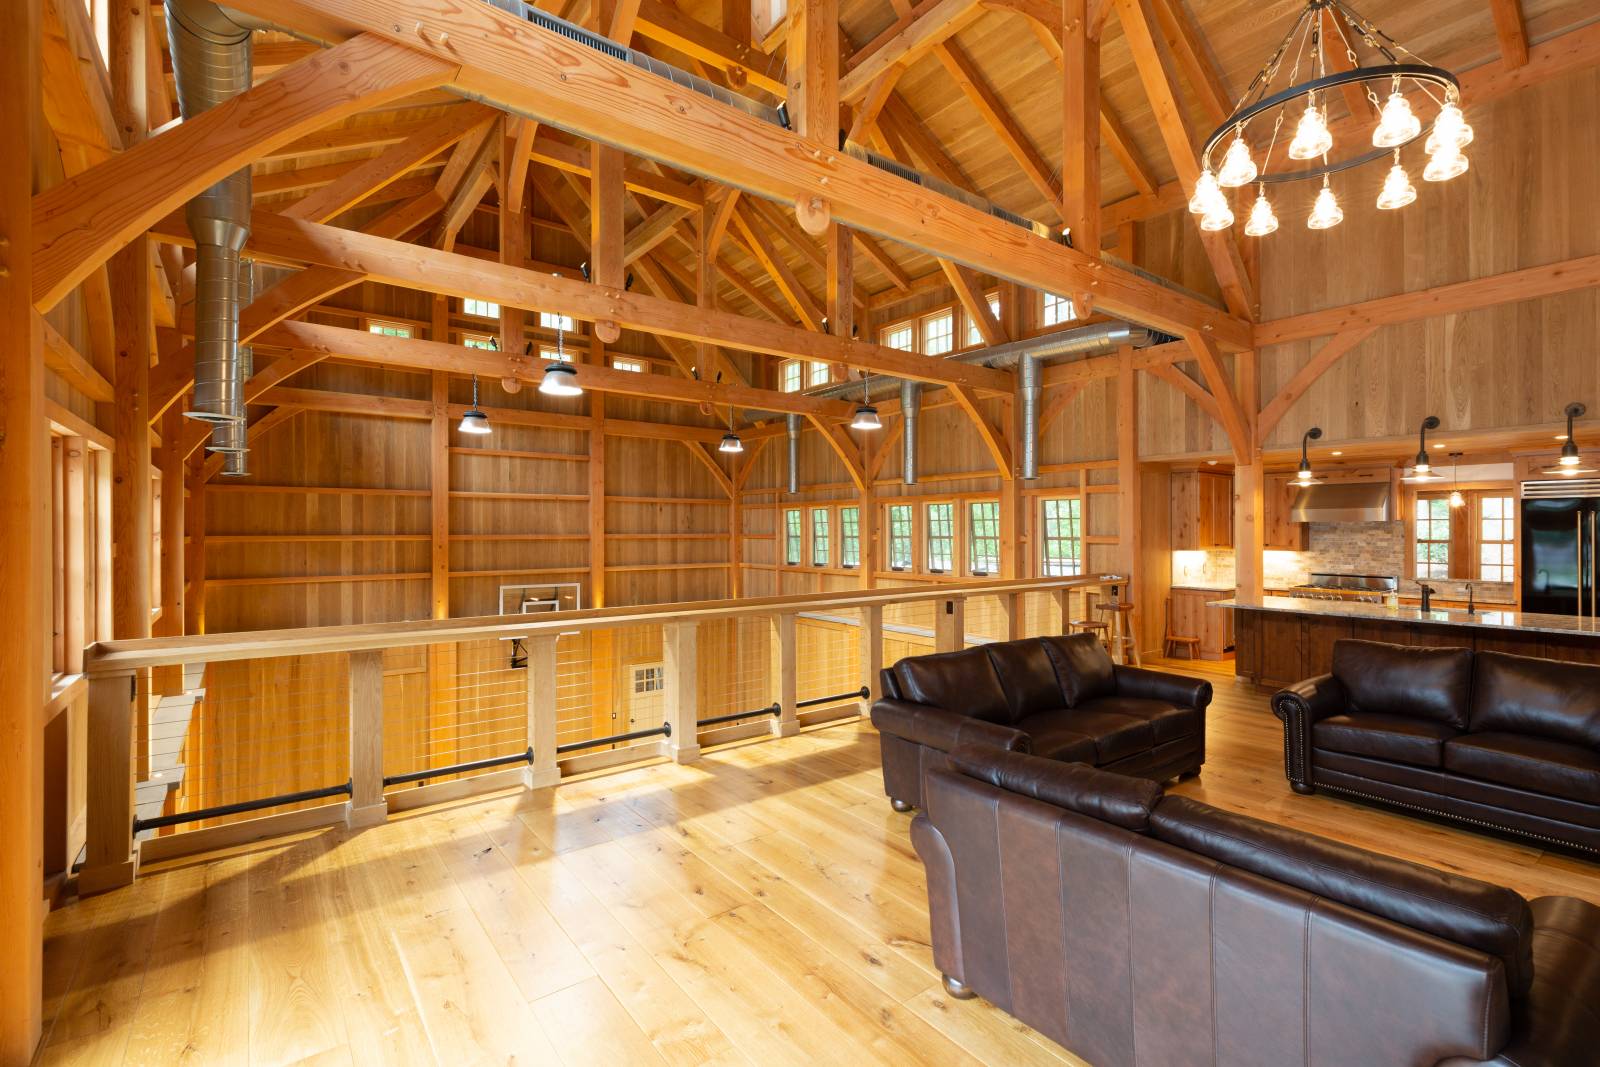 Upstairs Overlooking Basketball Court in the Custom Timber Frame Barn